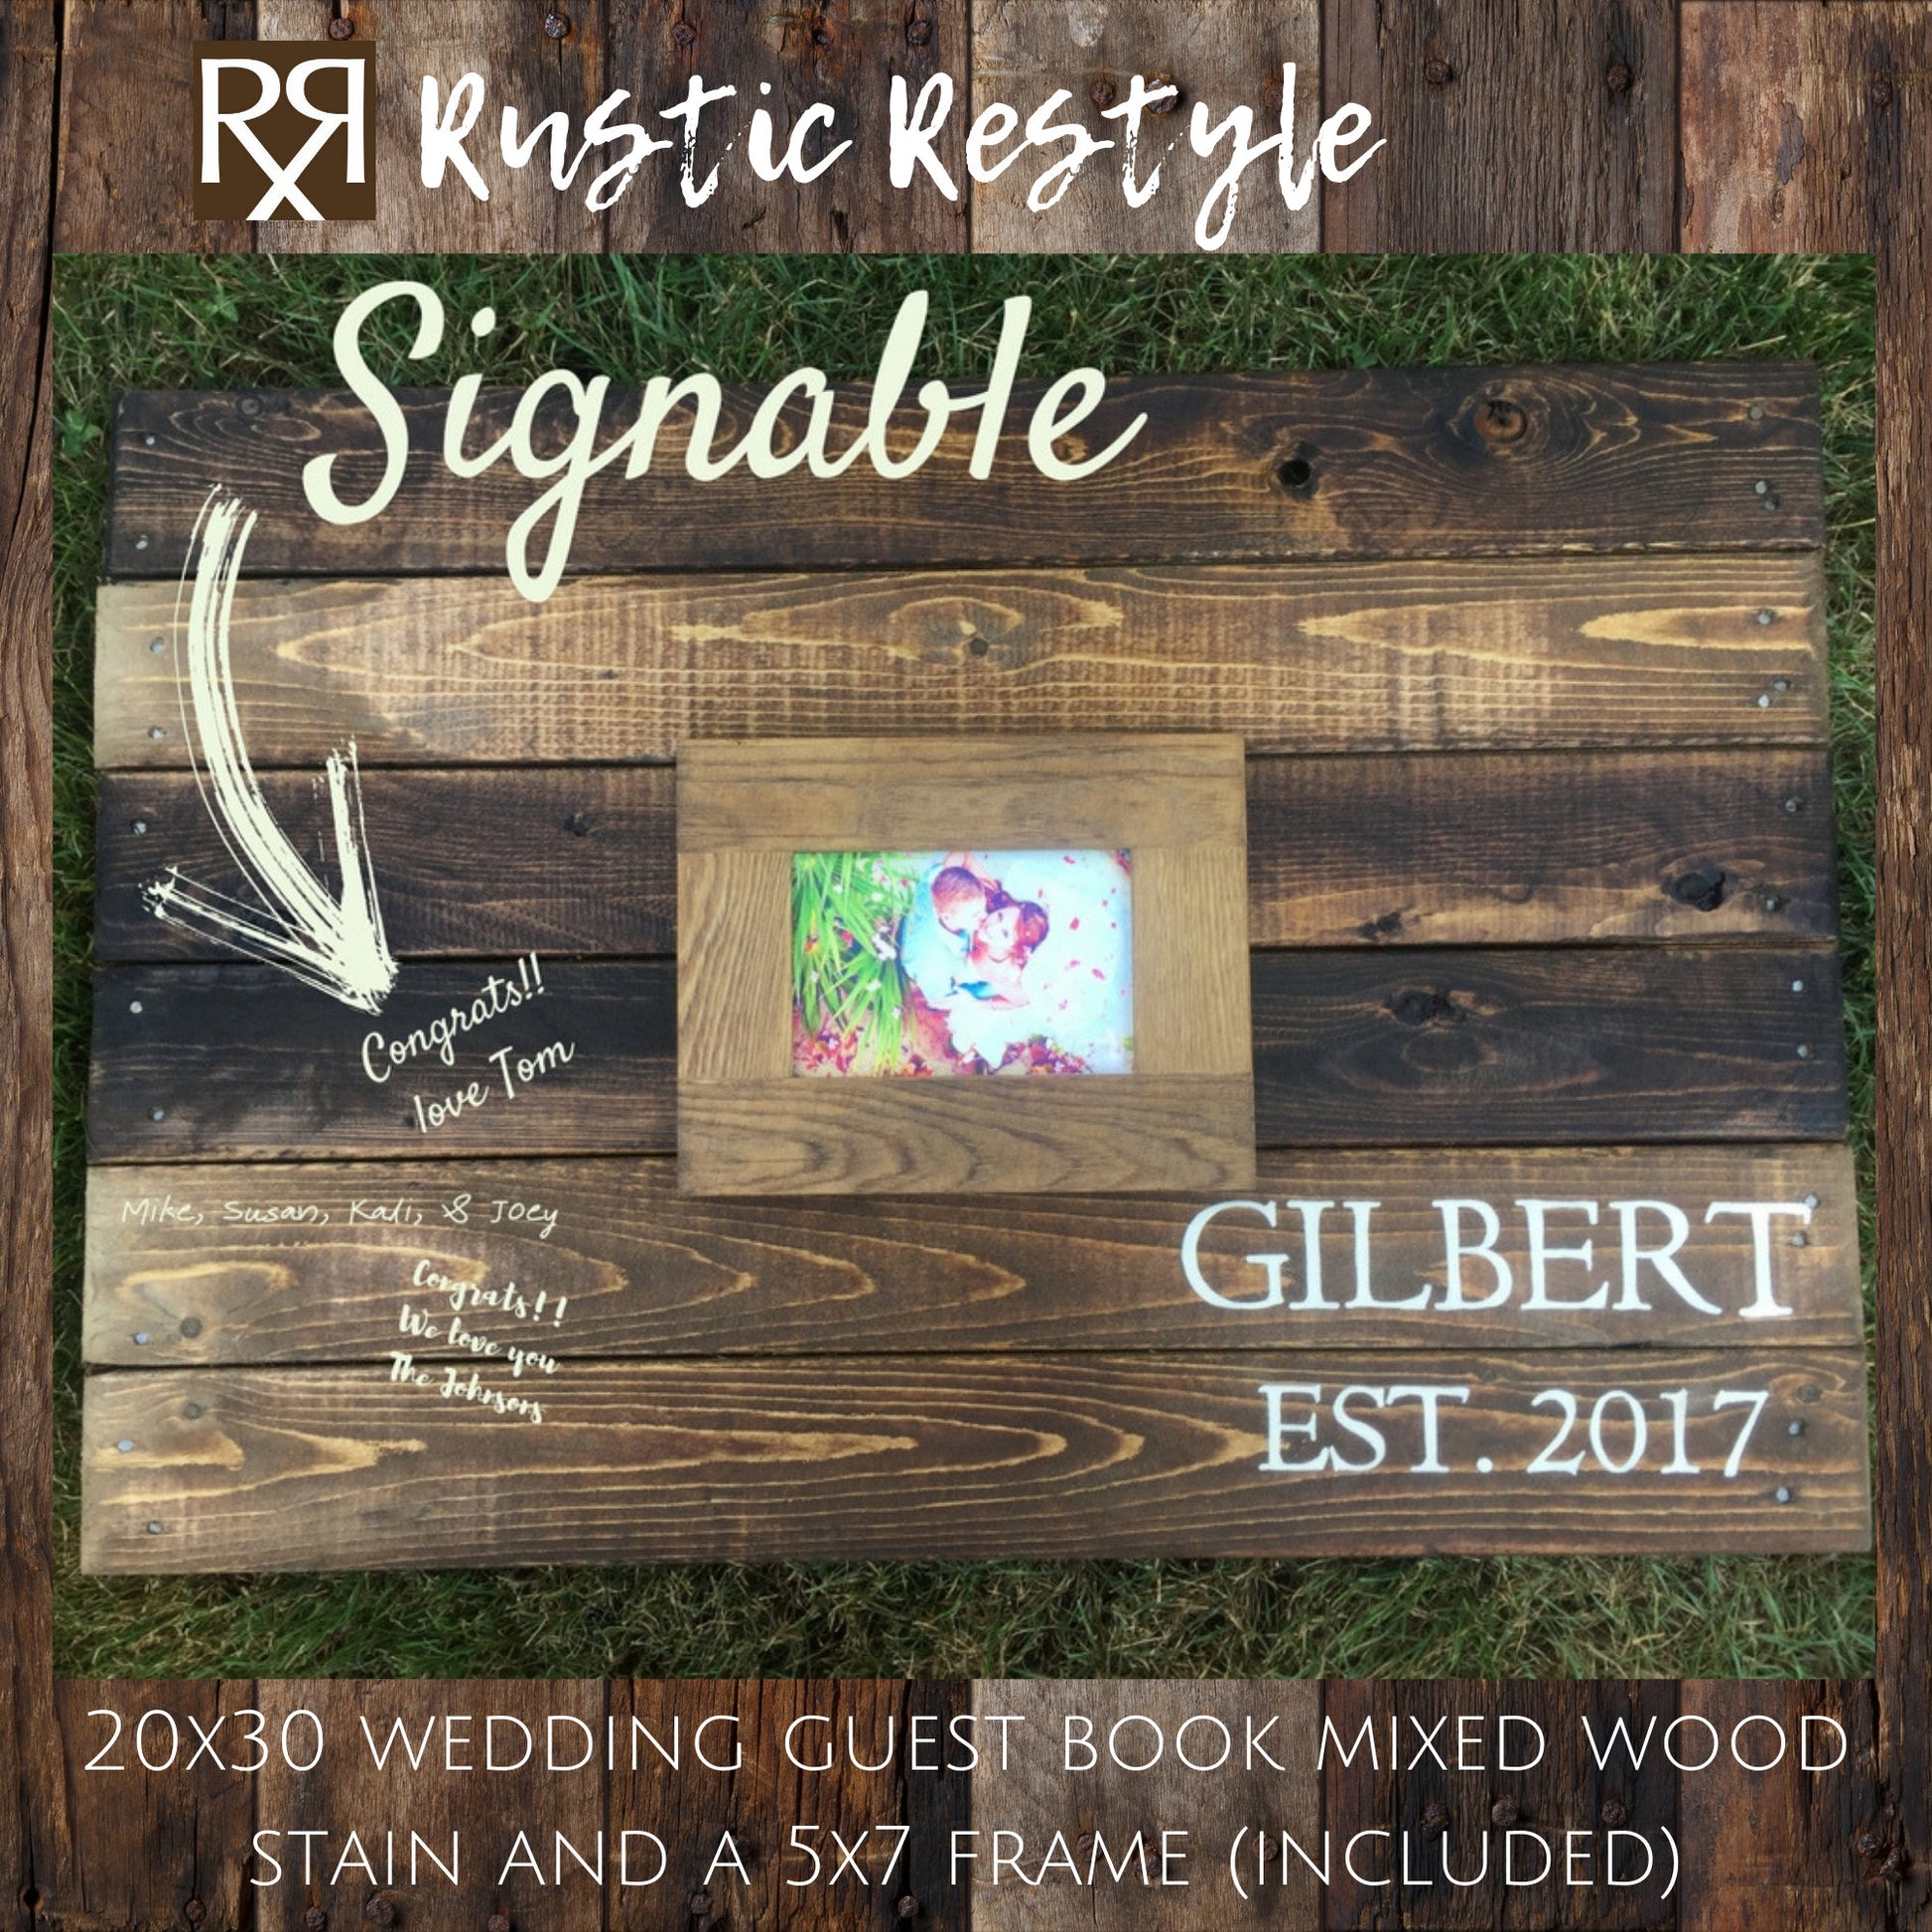 Guest book frame, Photo Guestbook sign, Wedding initials sign, rustic –  Rustic Restyle